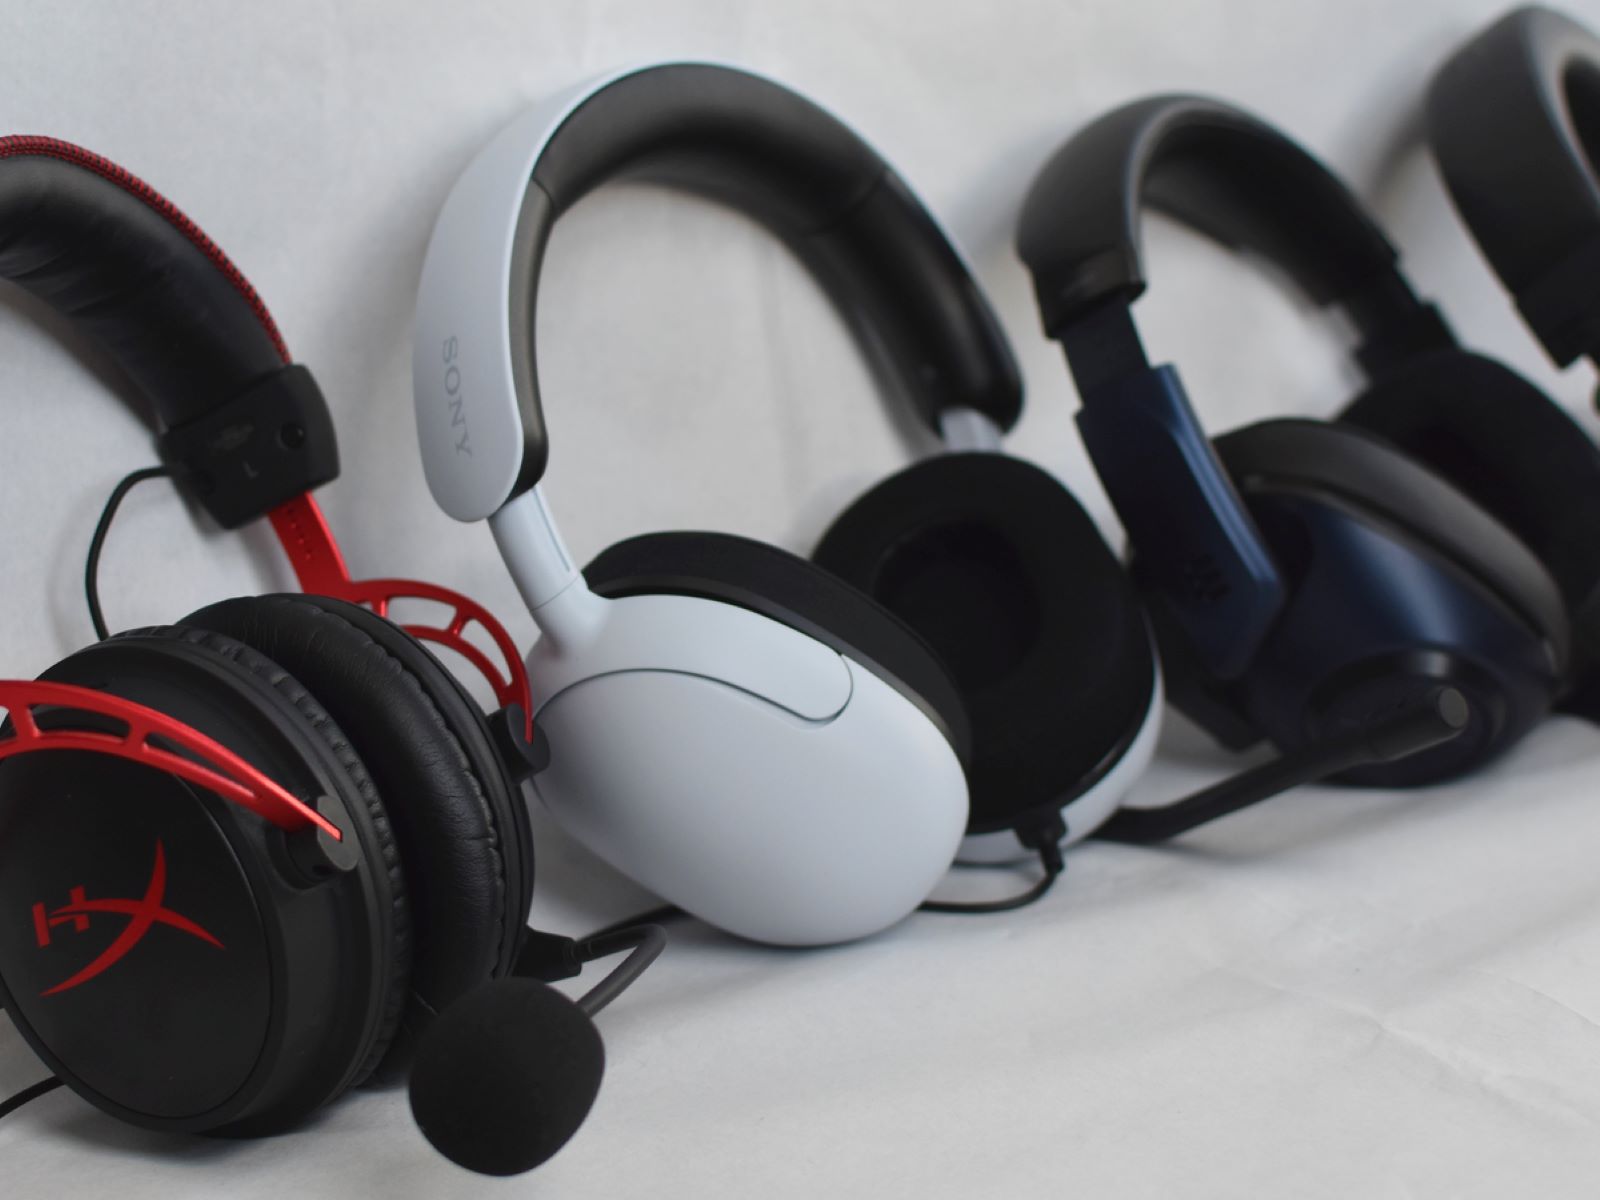 How To Make Your Gaming Headset Sound Louder